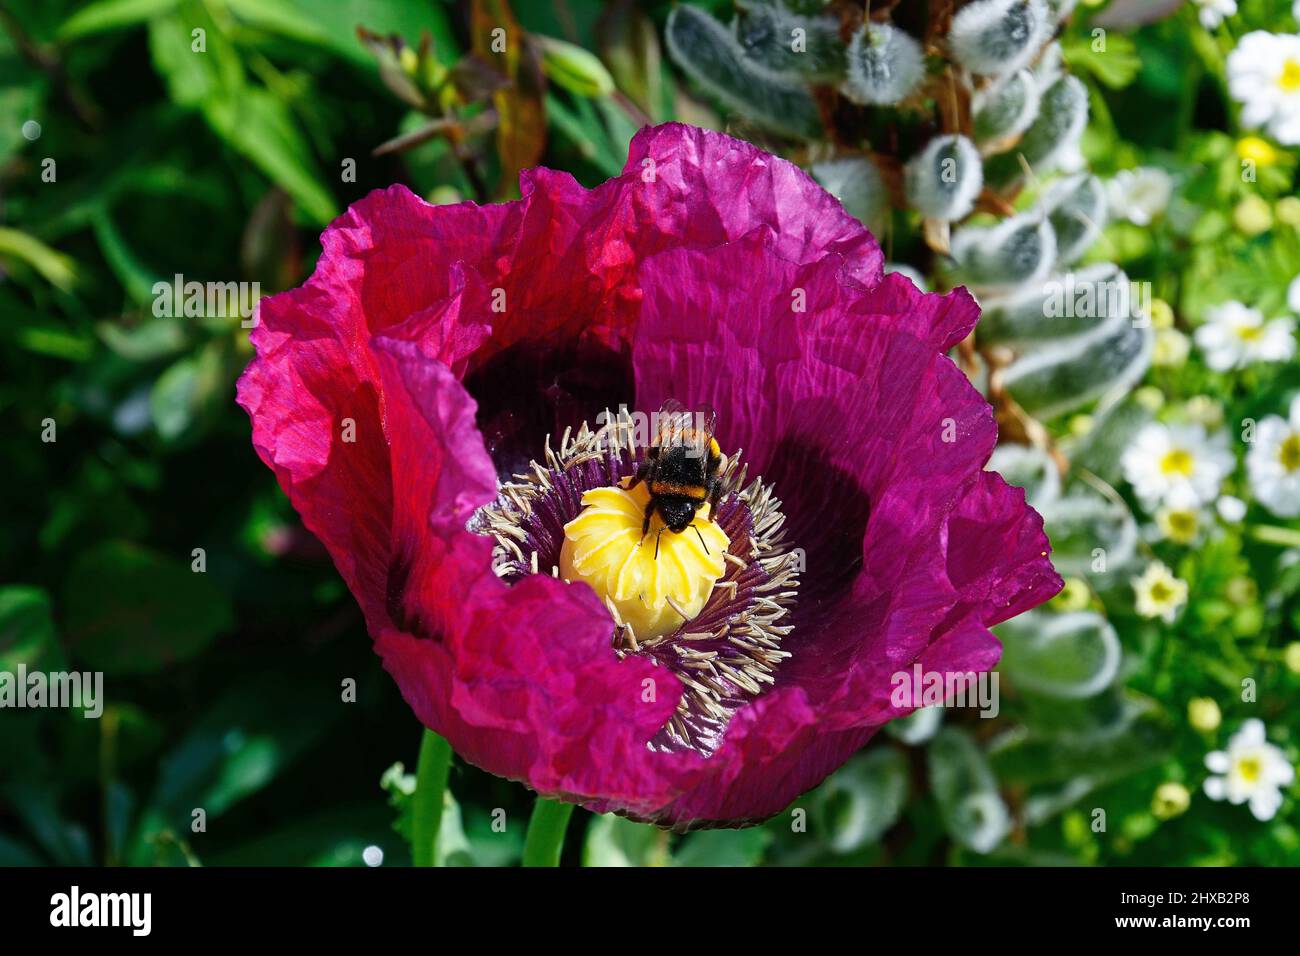 Bumble bee on a purple poppy during the Springtime, Staffordshire, England, UK, Europe. Stock Photo